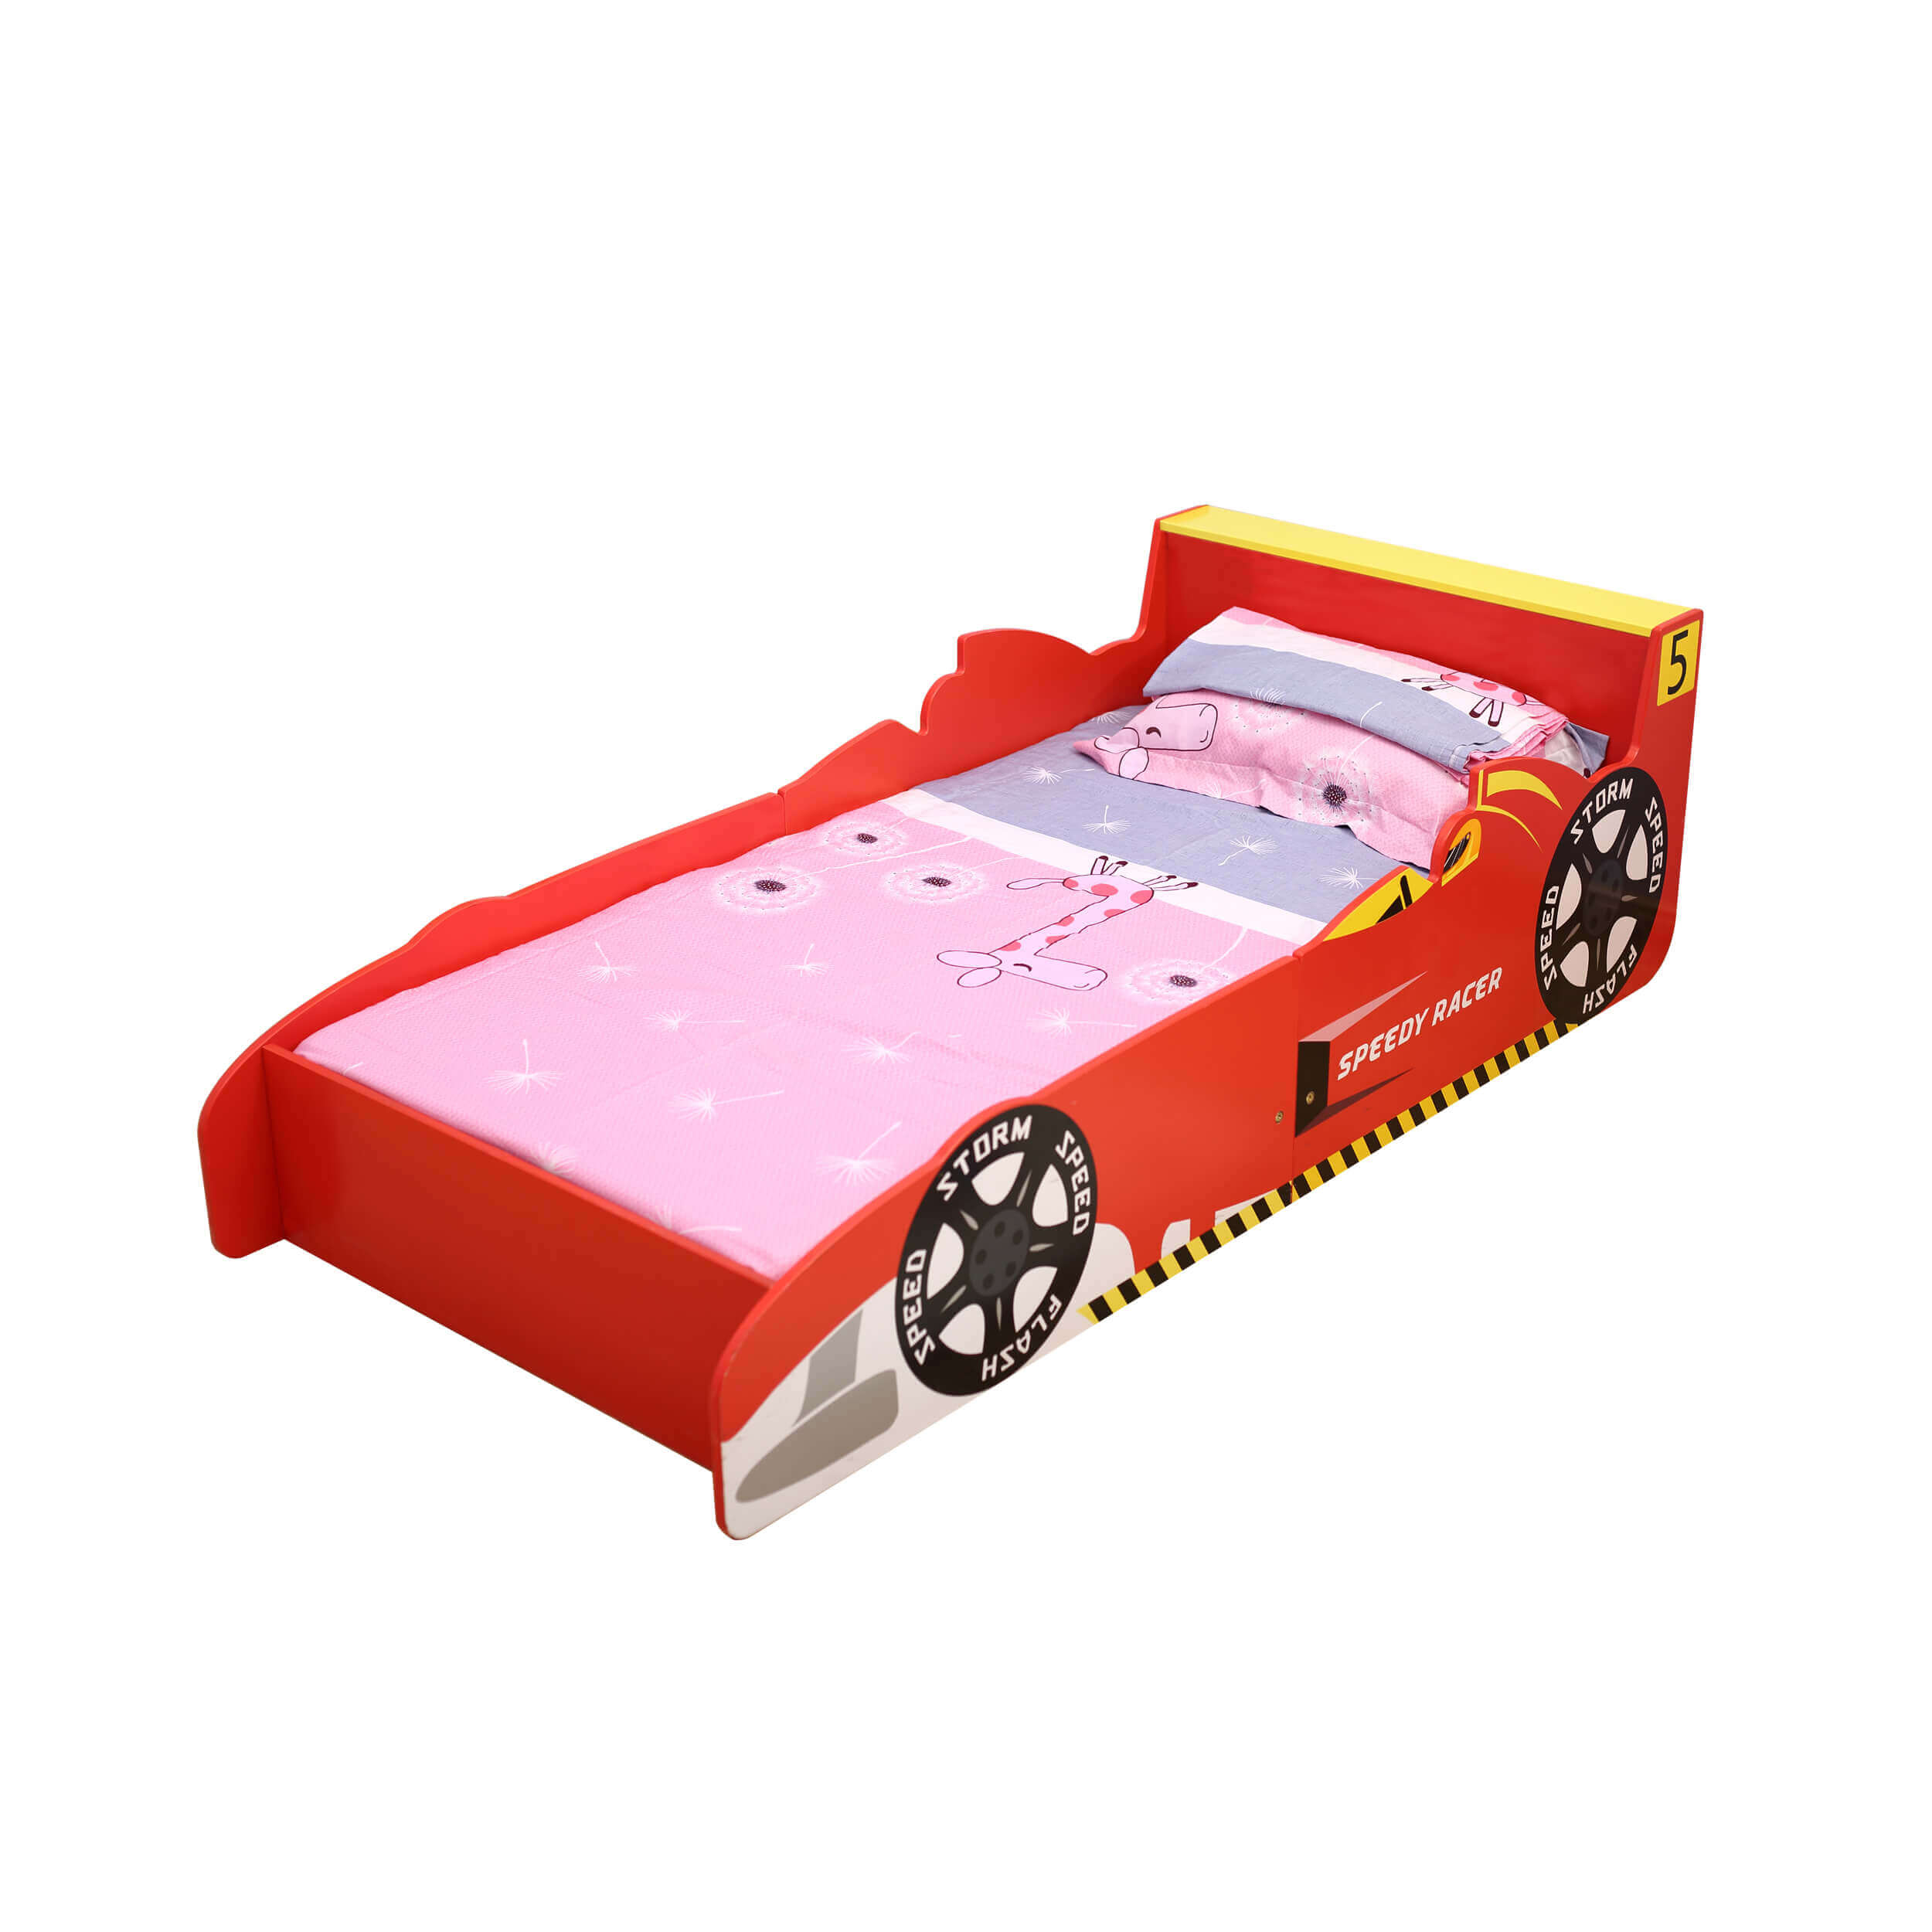 These Adult Race Car Beds Can Fit Queen & King Size Mattresses